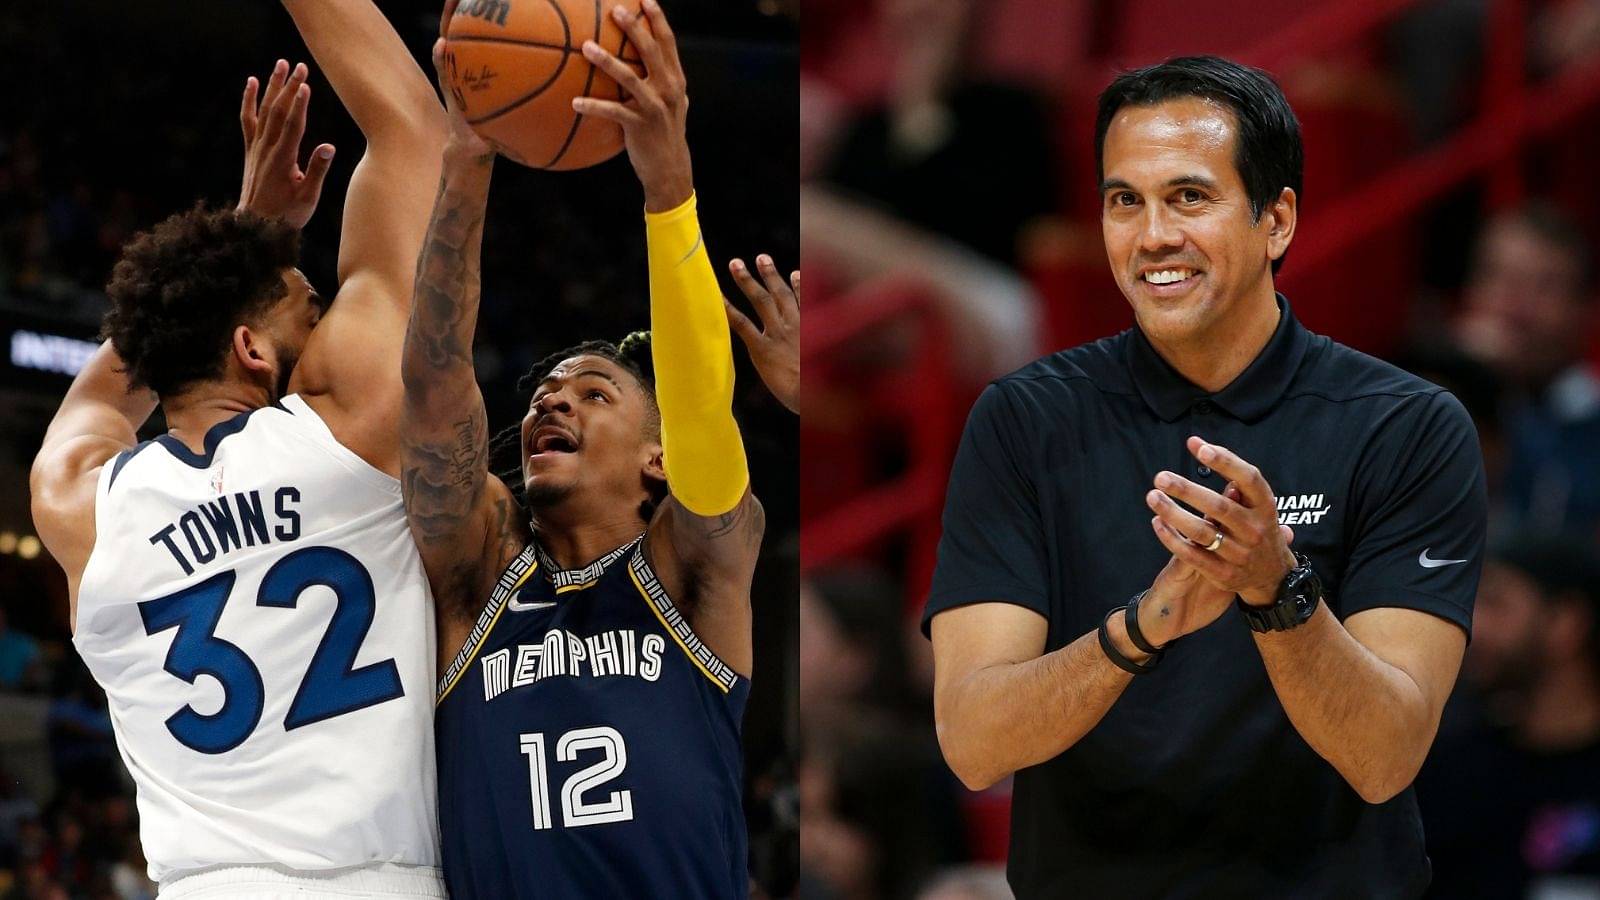 "You've got to be kidding me?! I thought this was going Overtime for sure": Ja Morant even left Miami Heat coach in disbelief with his game-winner against the Timberwolves